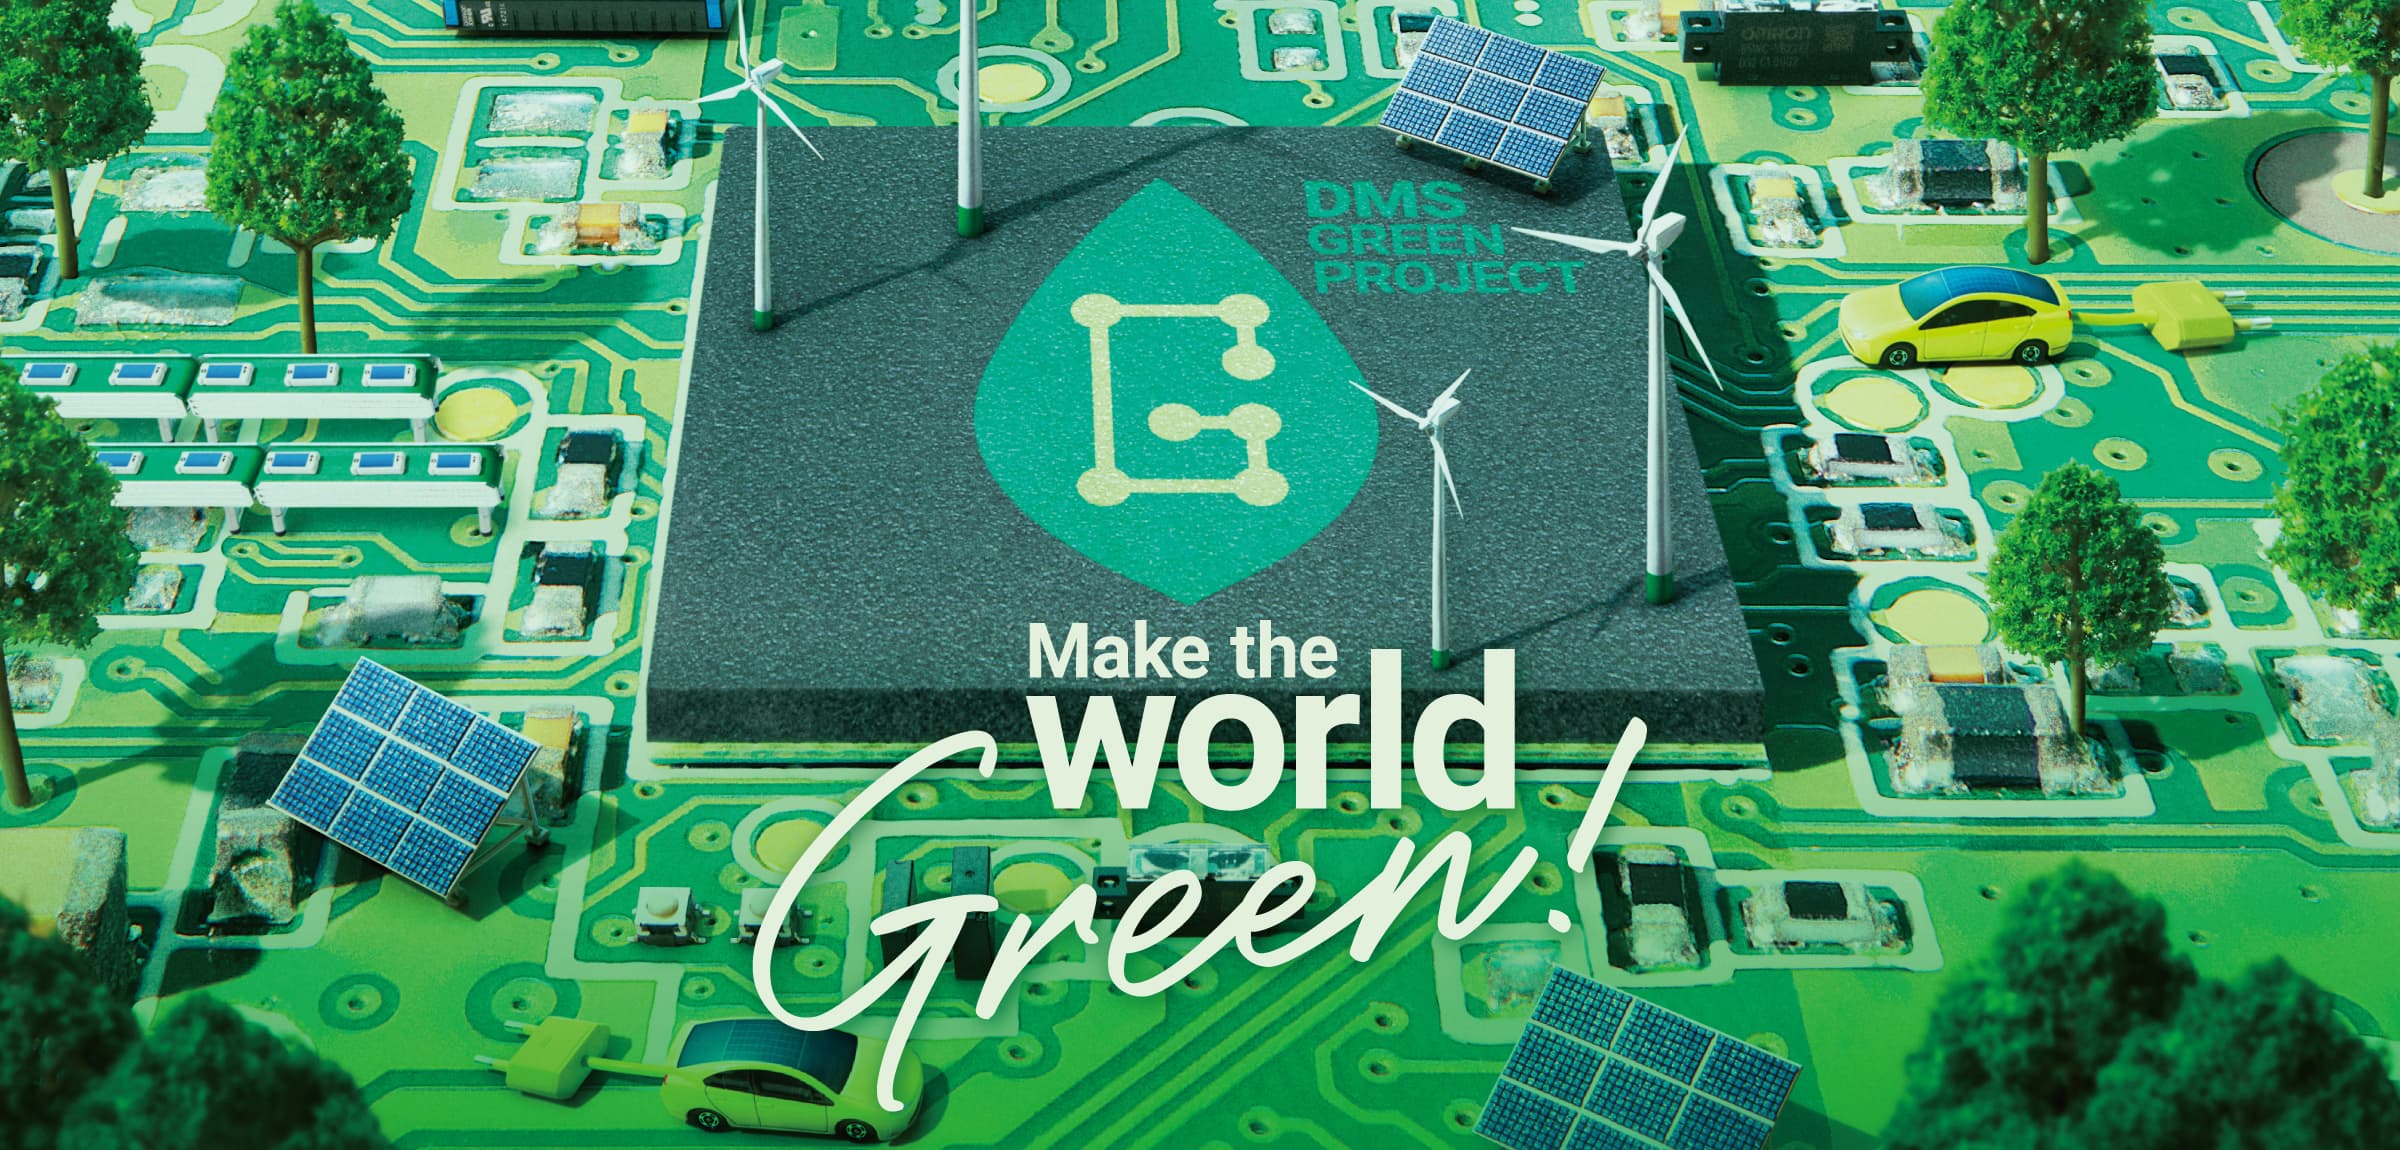 DMS GREEN PROJECT - Make the World Green!